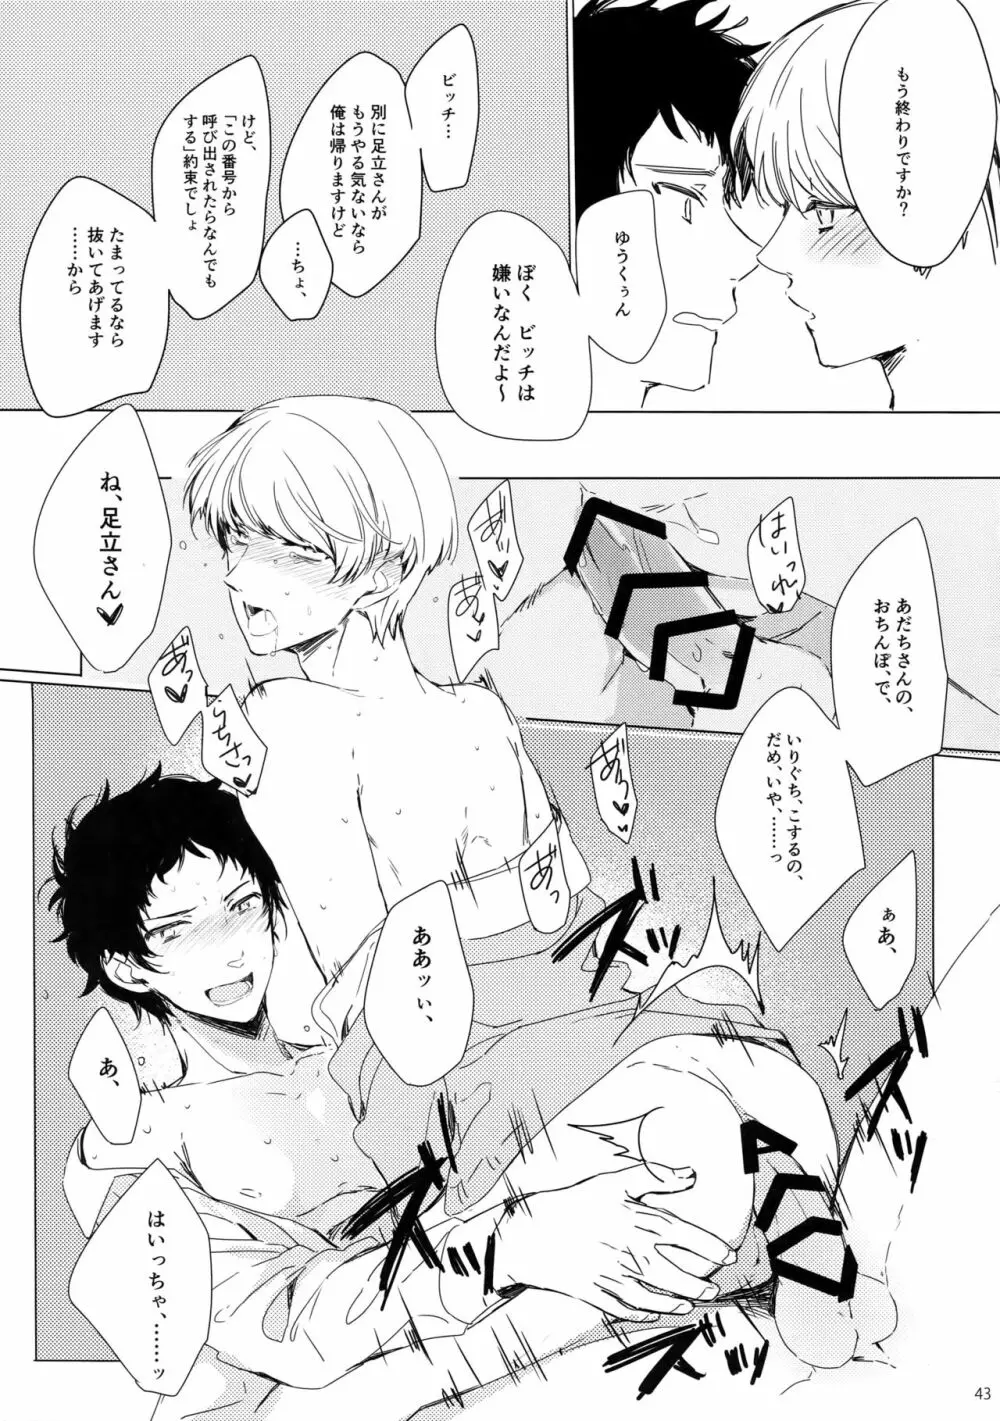 After Page.42